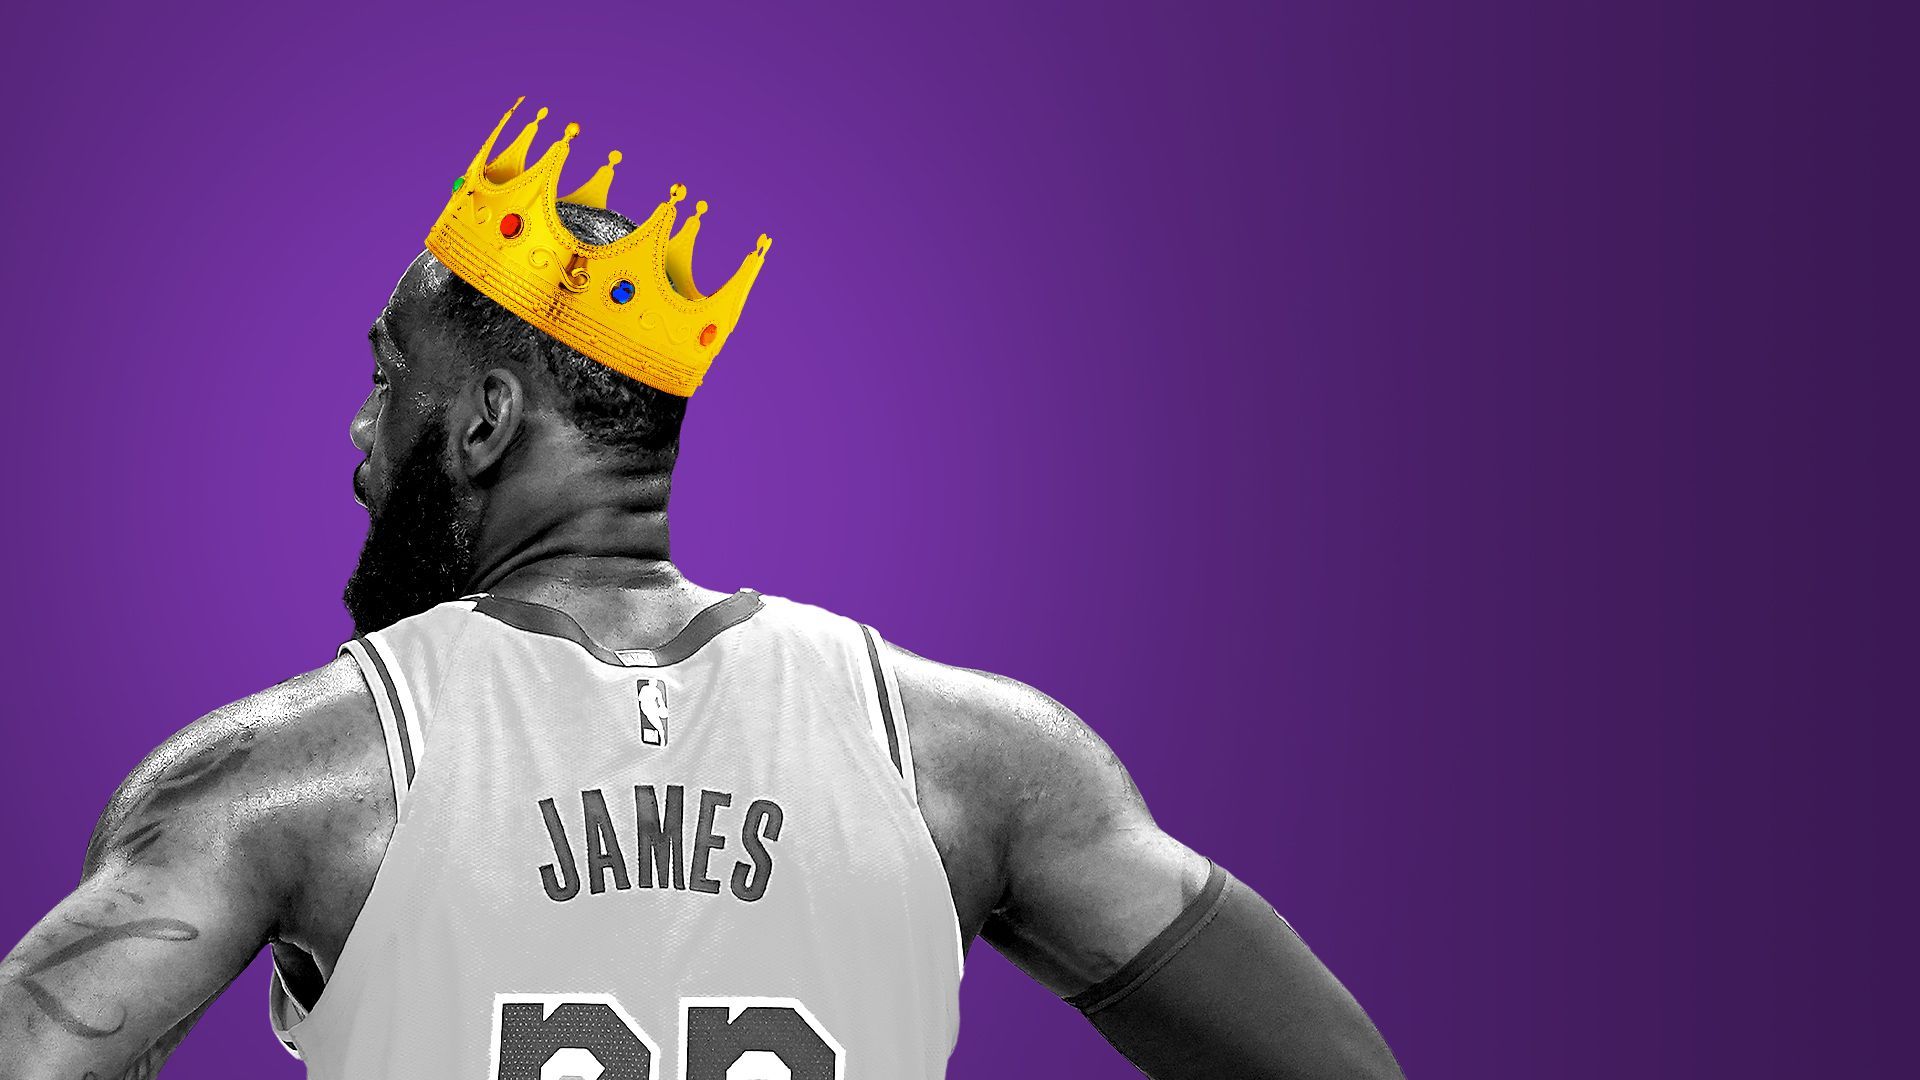 Illustration of Lebron James with a crown on his head.